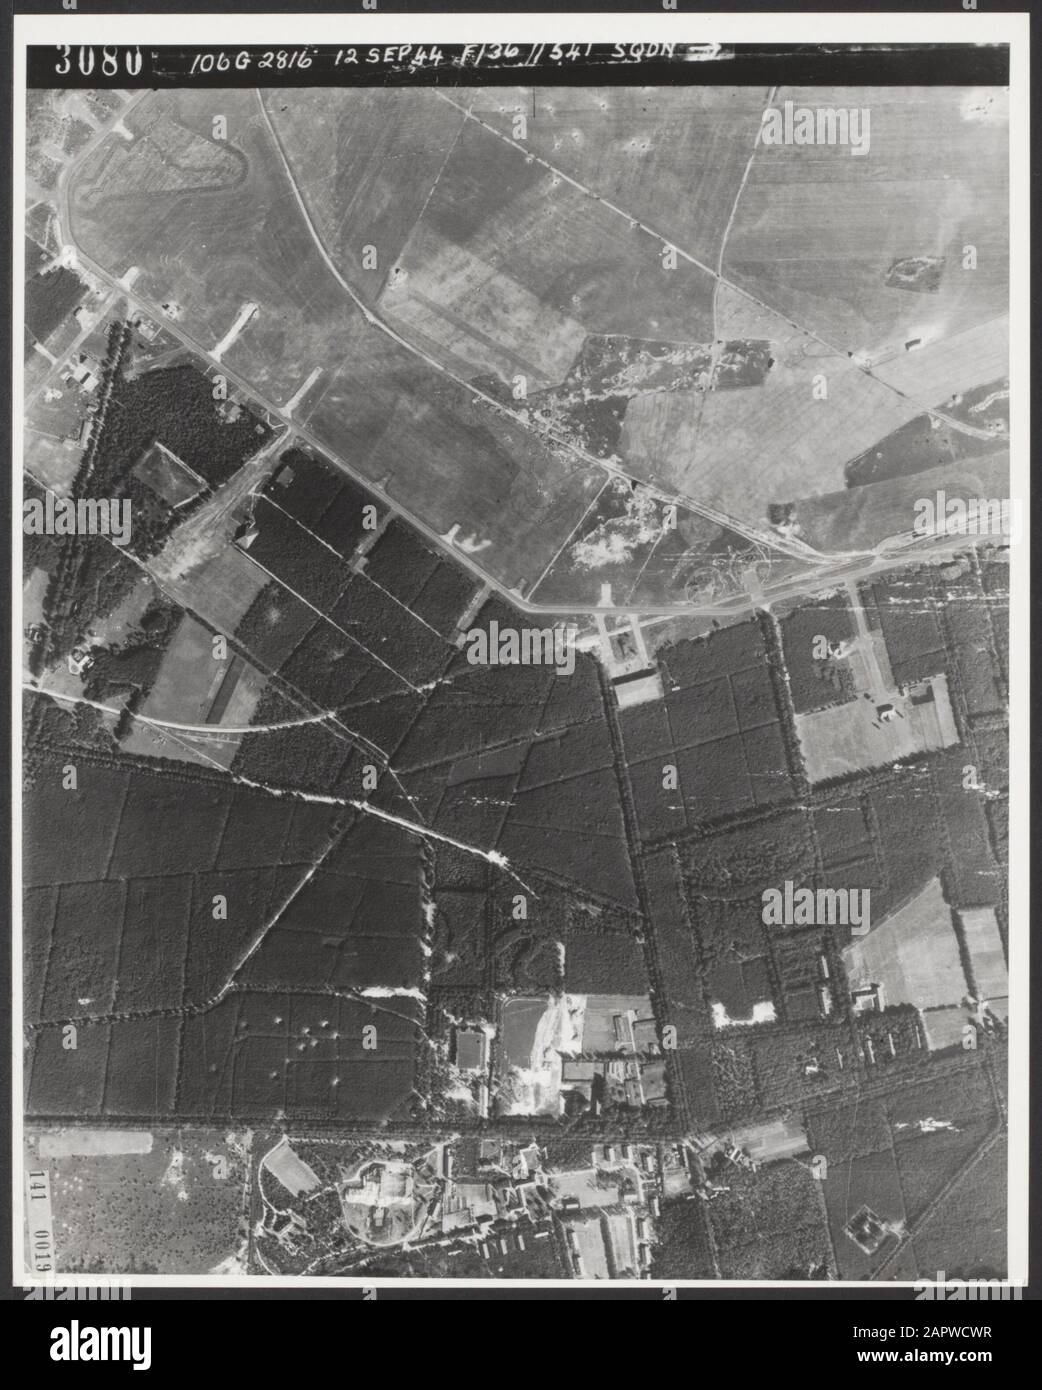 Air recording [Operation Market Garden] [Battle of Arnhem]. In the vicinity of Arnhem (Schaarsbergen) the Germans built a large bunker. From here, the command post Diogenes arranges the entire German air defense of northern Europe; Stock Photo